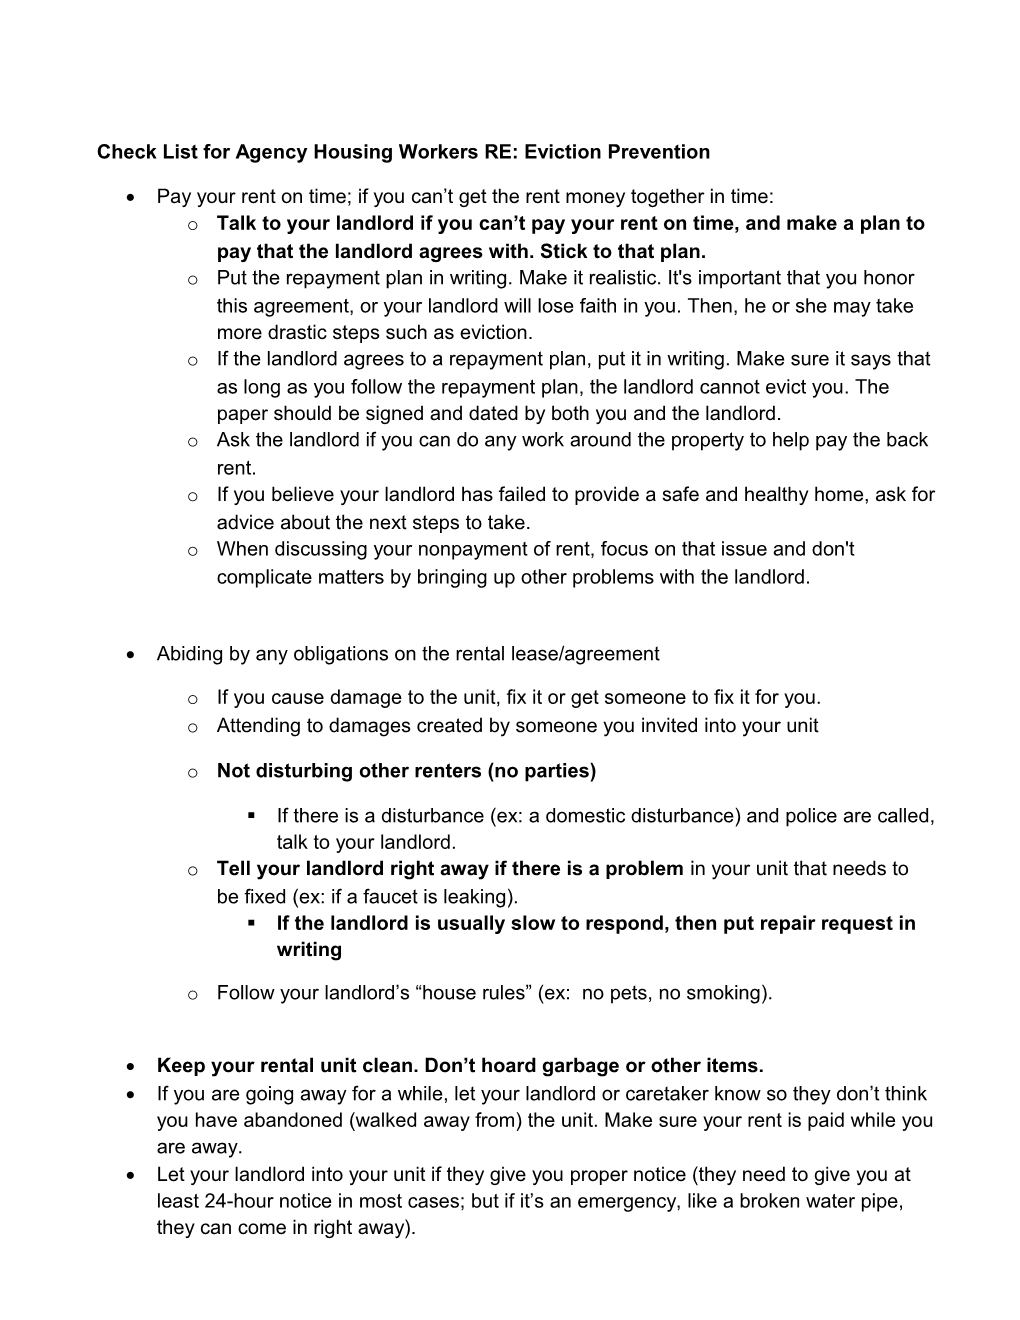 Check List for Agency Housing Workers RE: Eviction Prevention